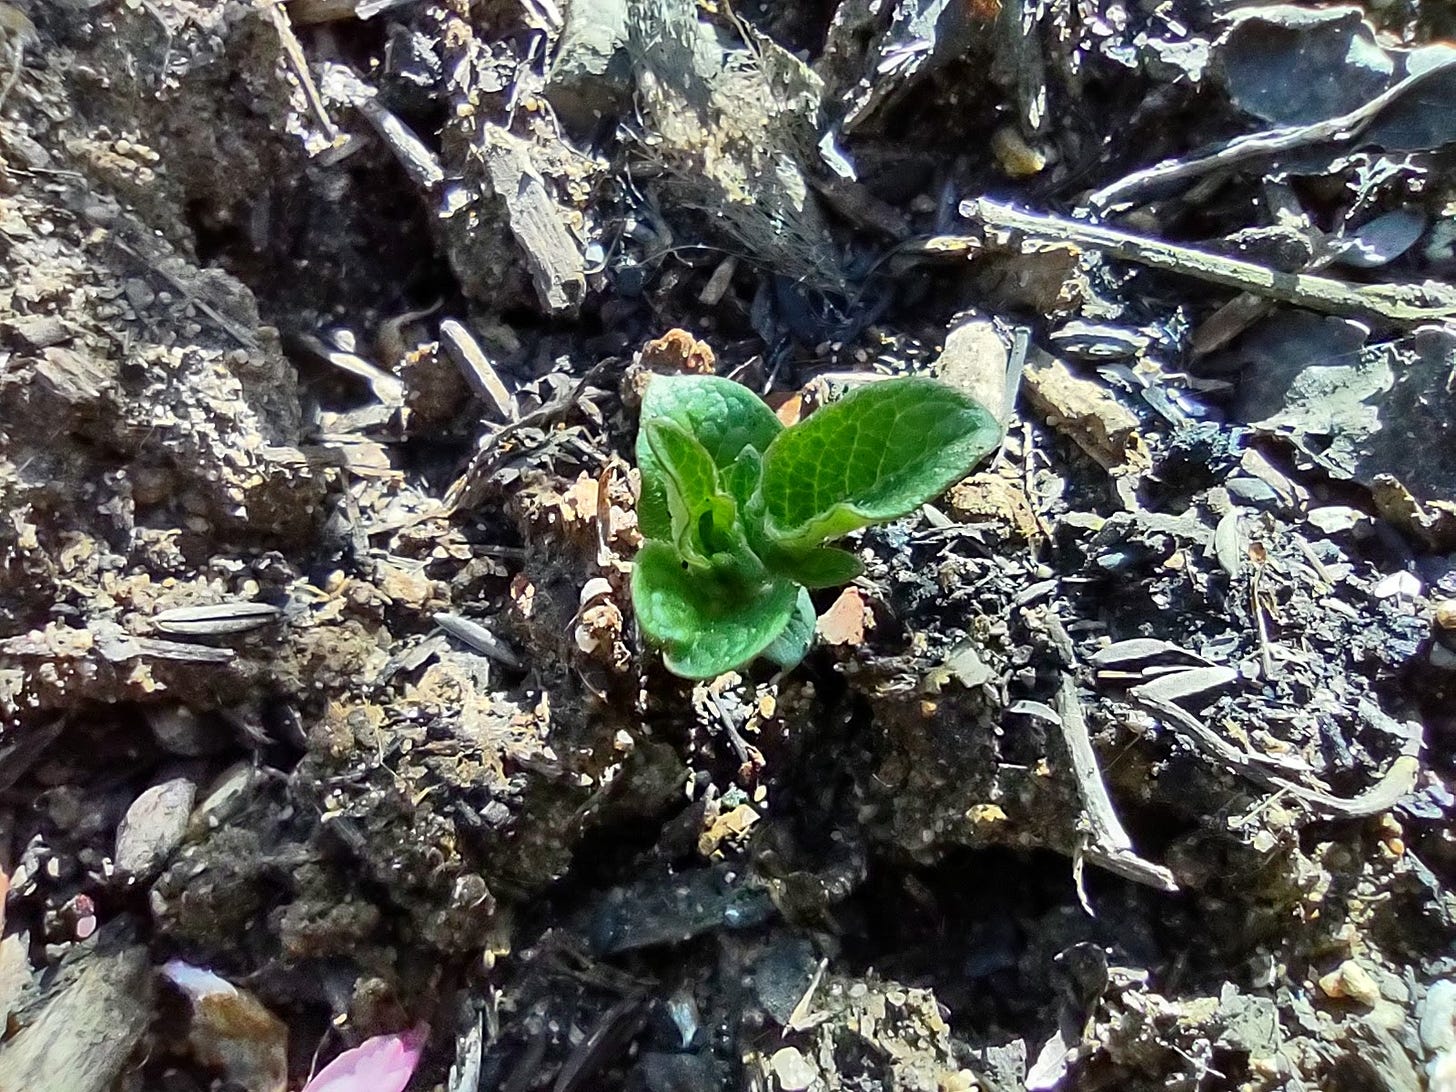 A small green plant pushing through the ground